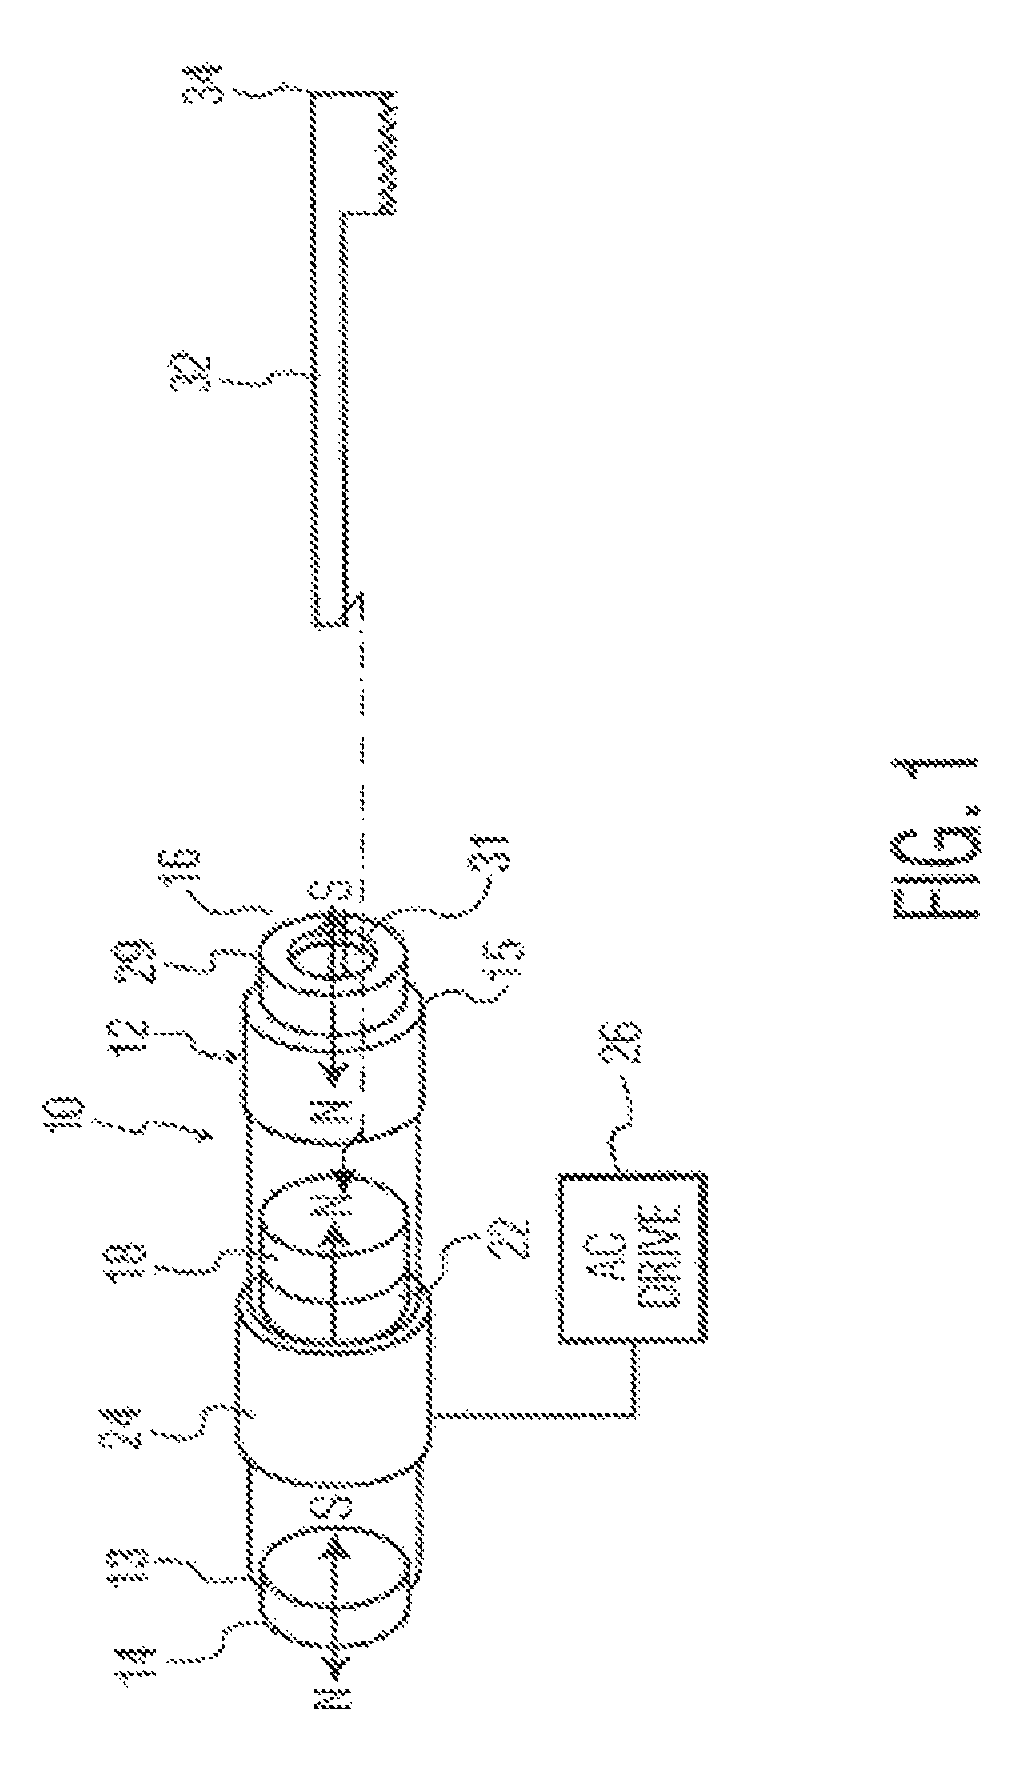 Magnetic spring system for use in a resonant motor